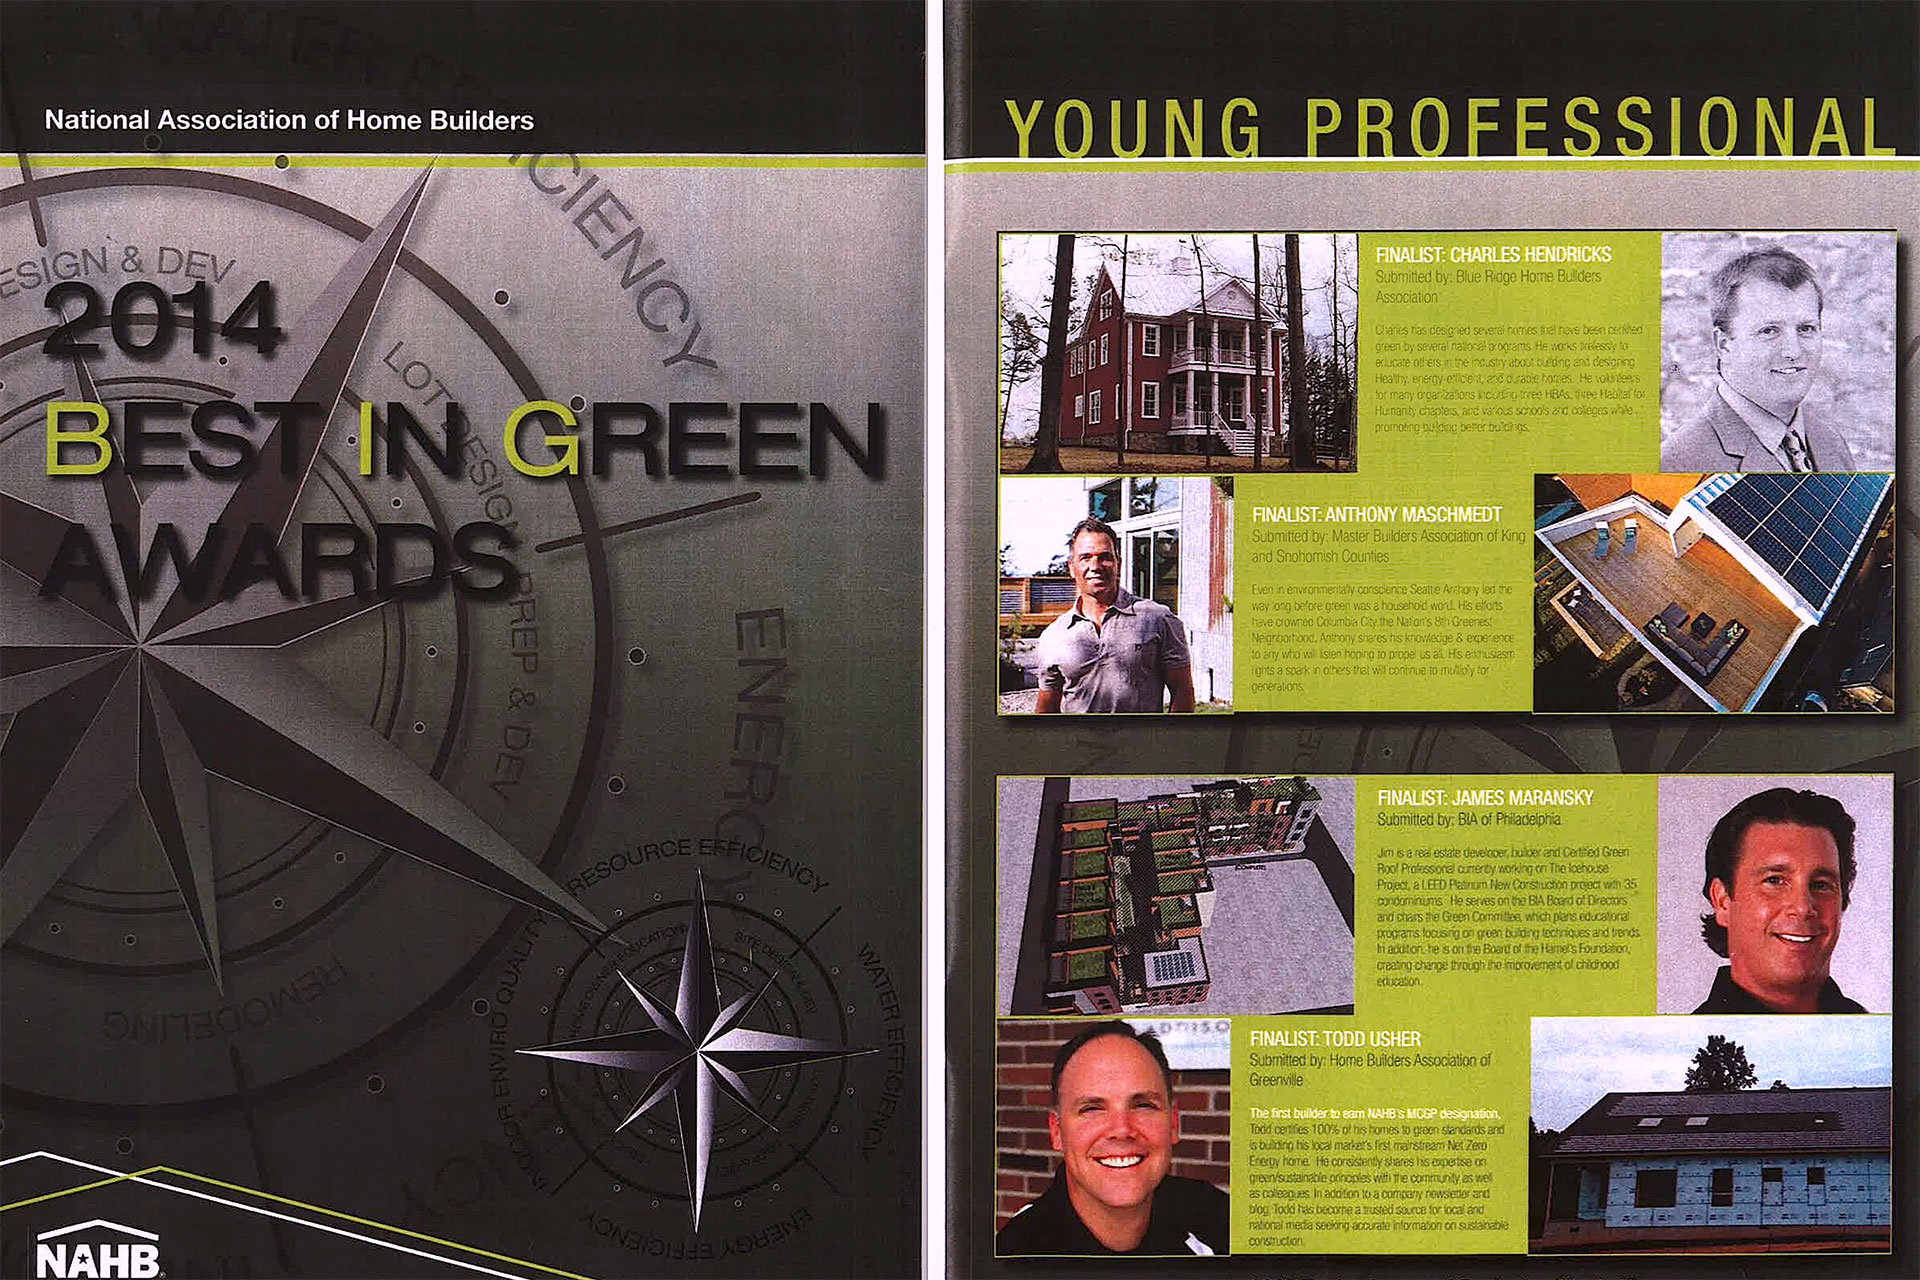 2014 Best in Green Young Professional Award